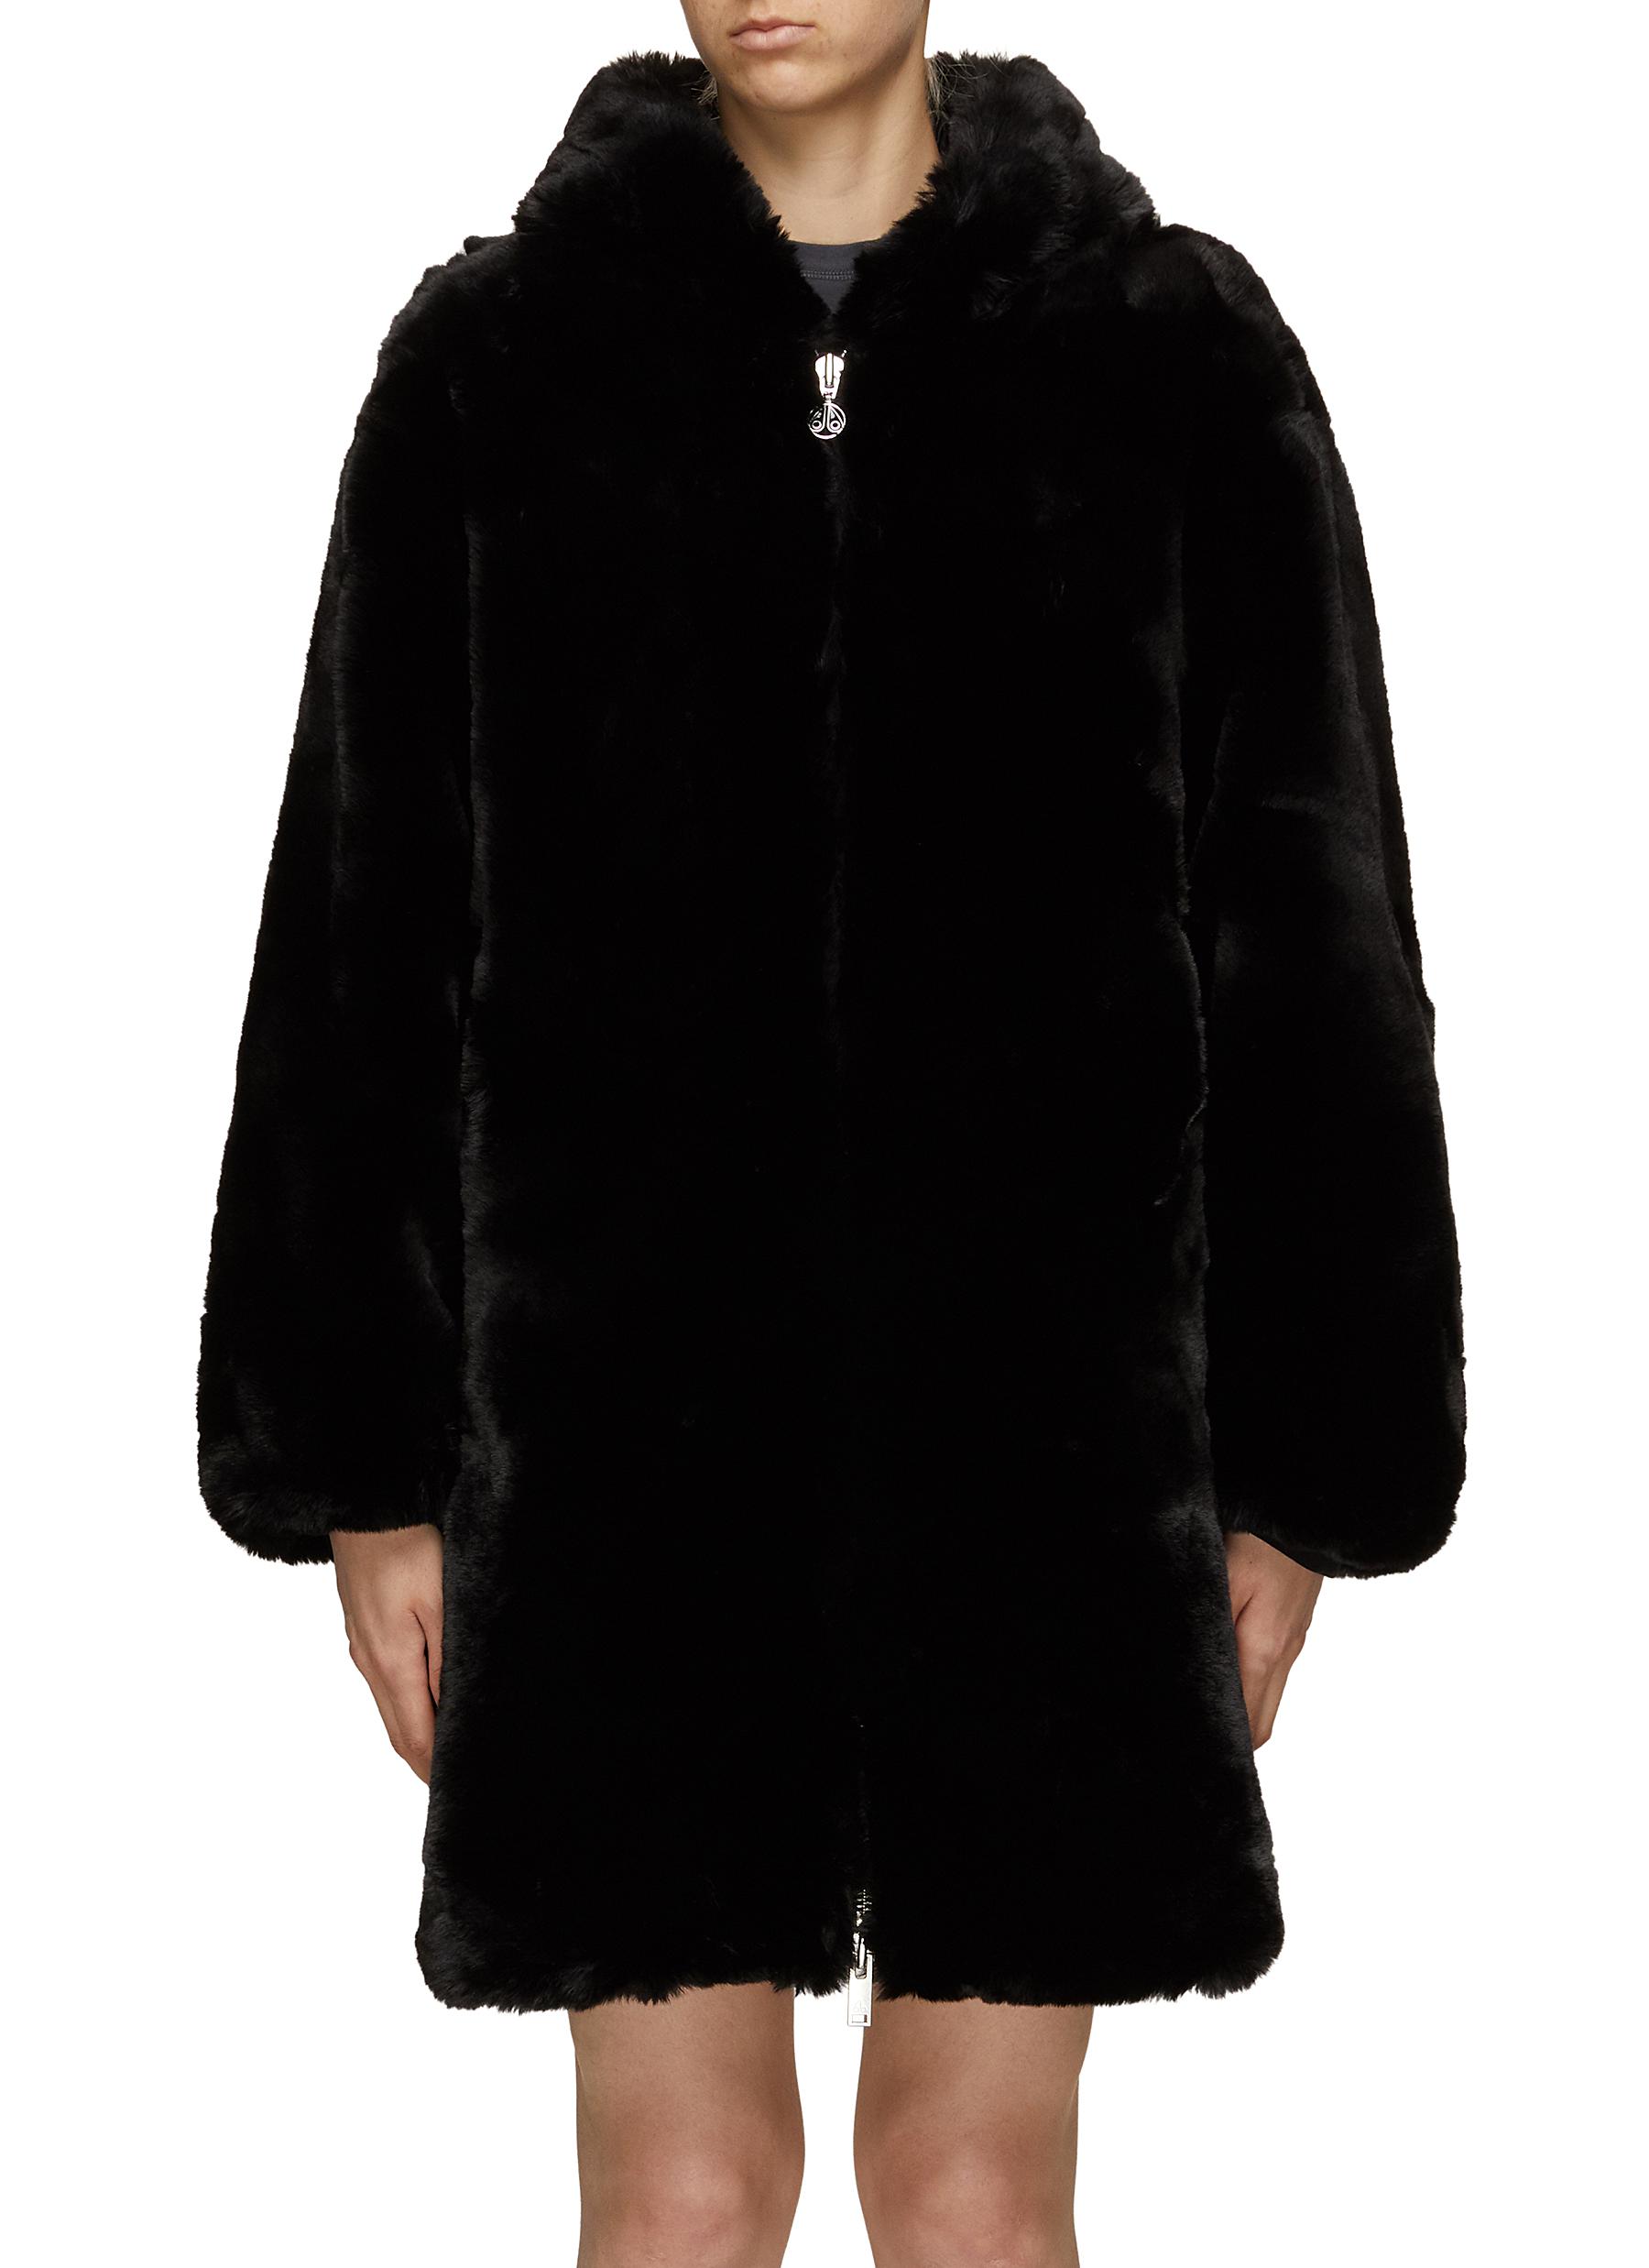 State Bunny Hooded Faux Fur Coat